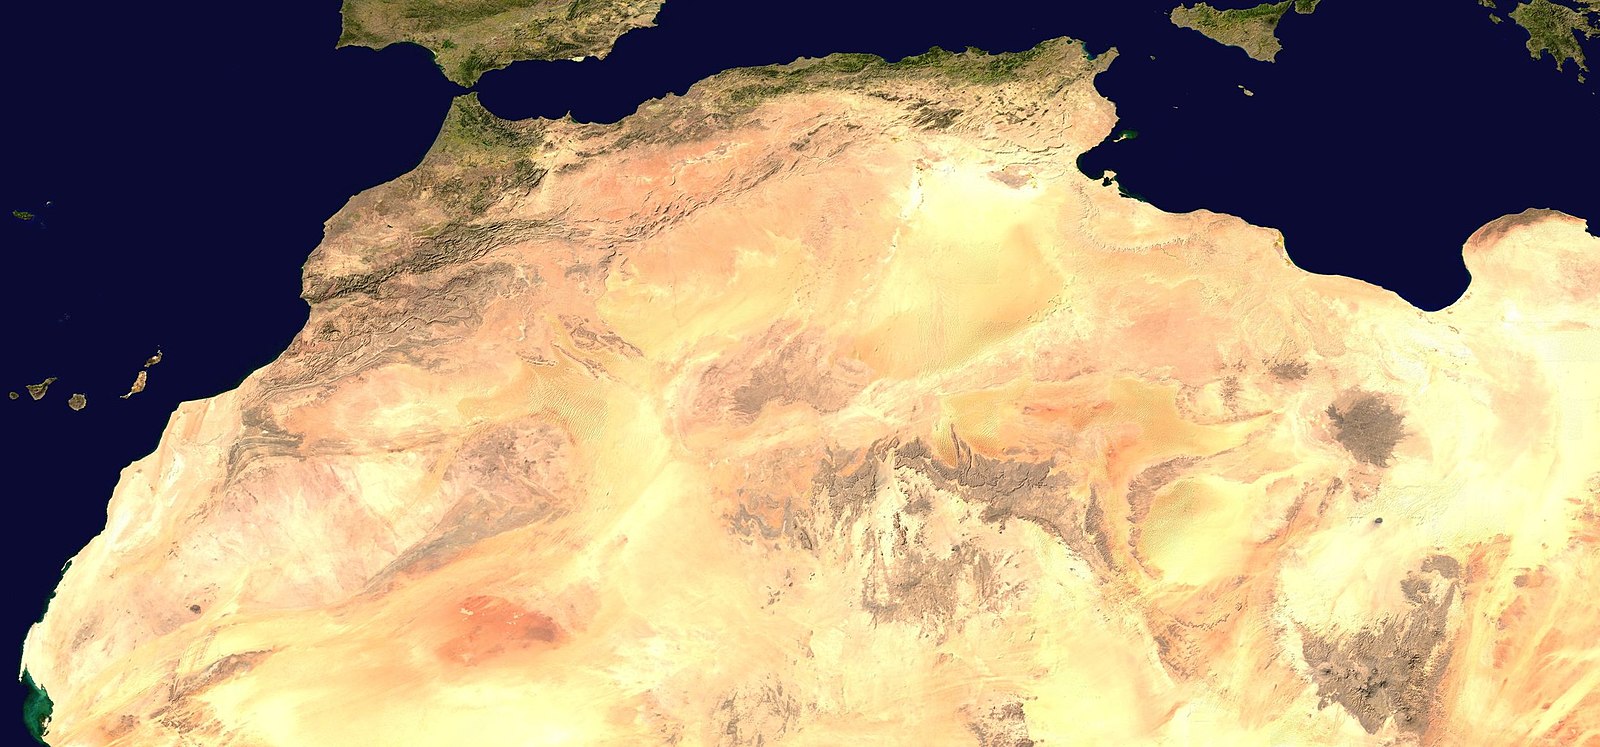 A satelite view of the Maghreb region in North Africa.